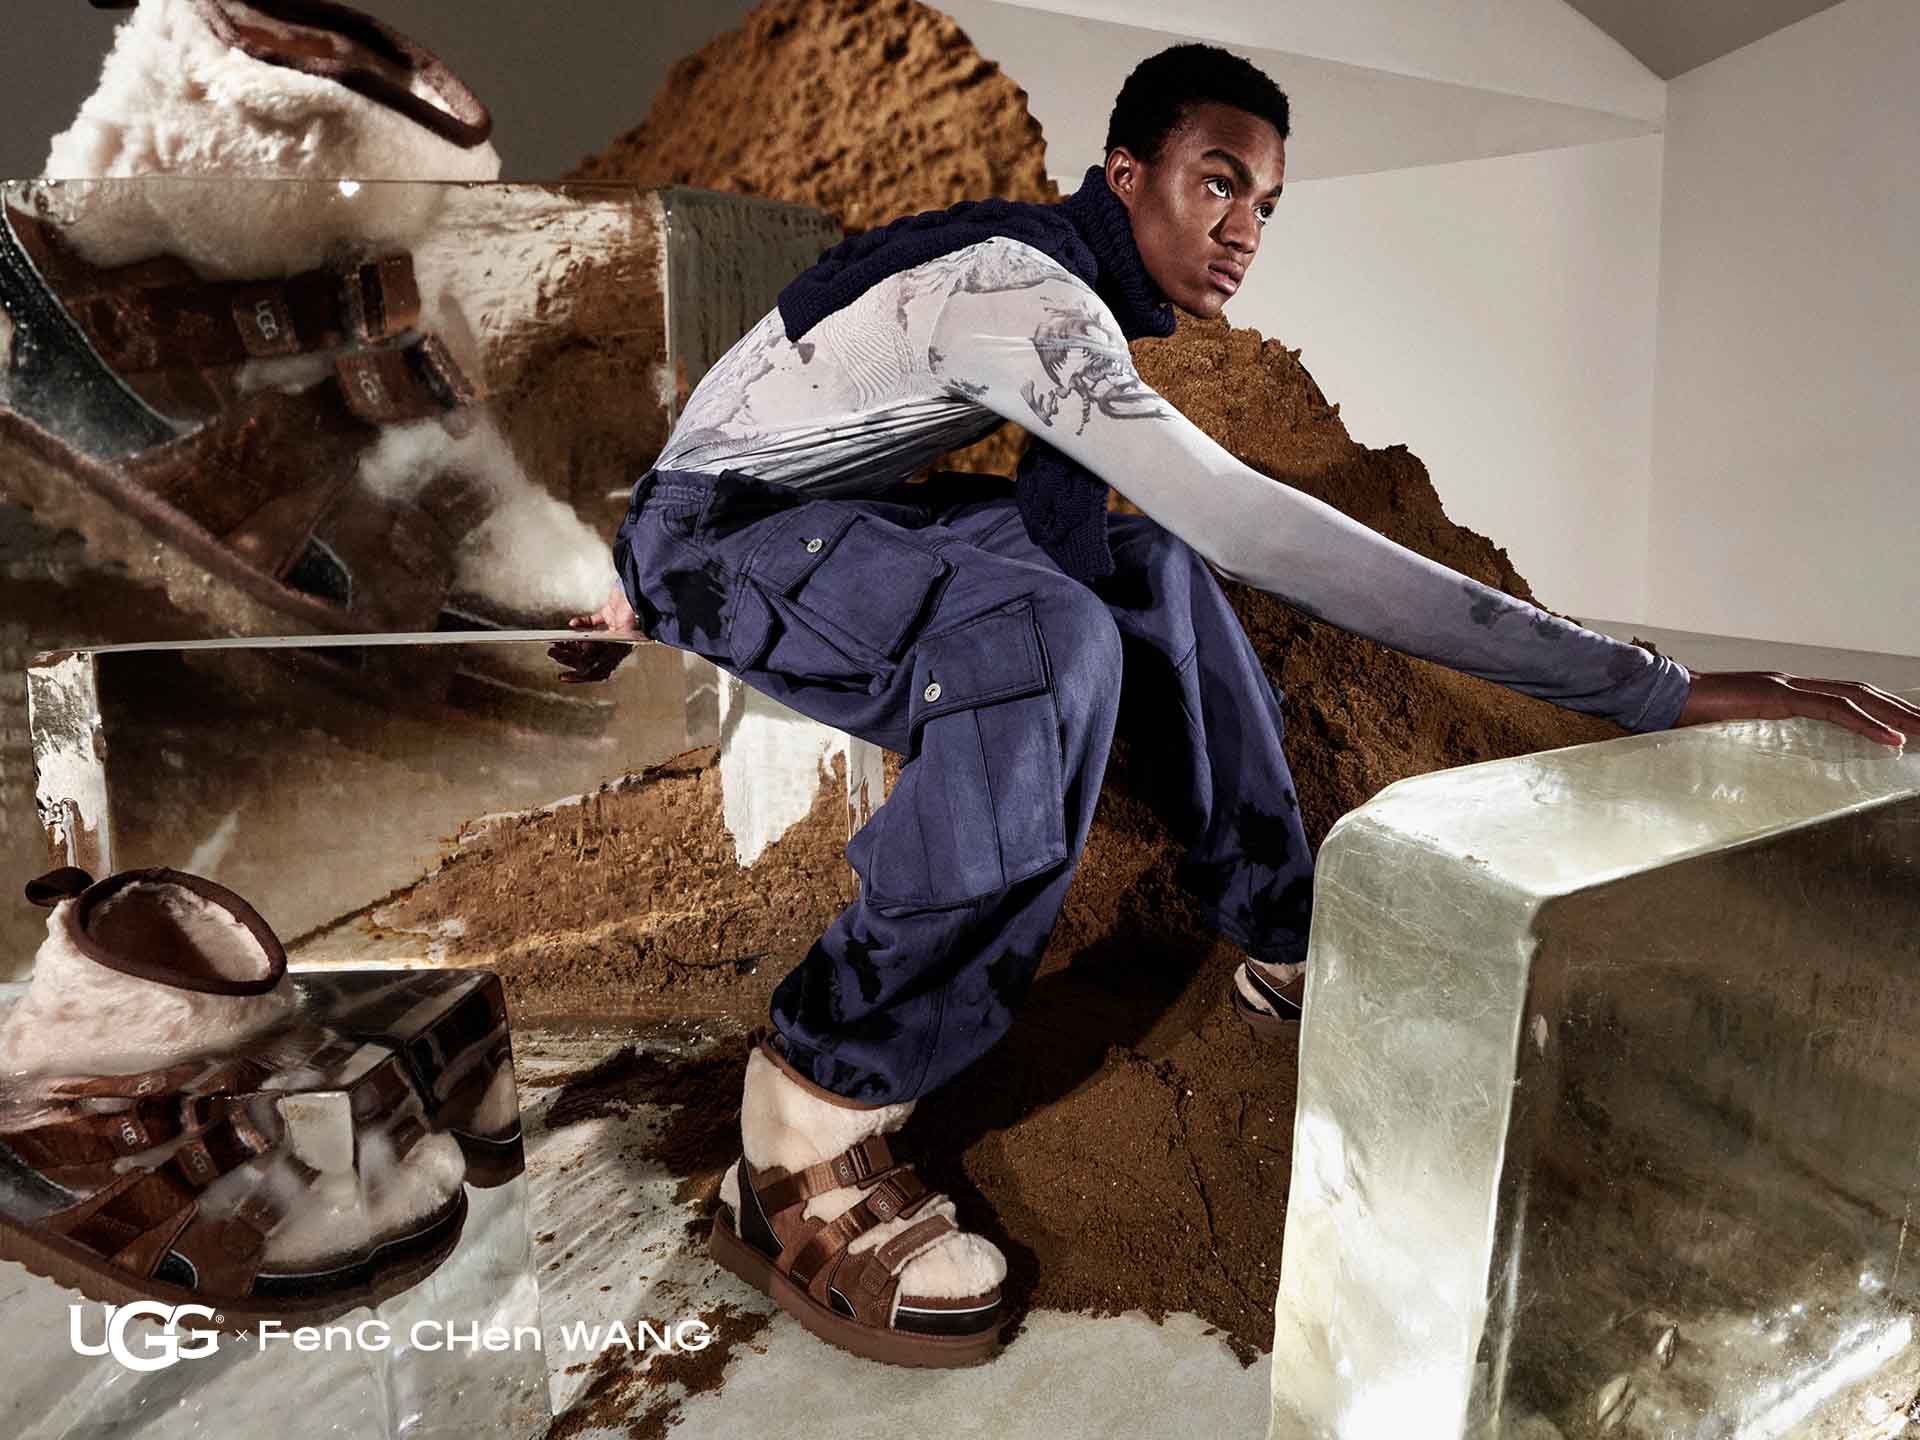 Ugg x Feng Chen Wang Campaign: The Perfect Shoe for Any Time